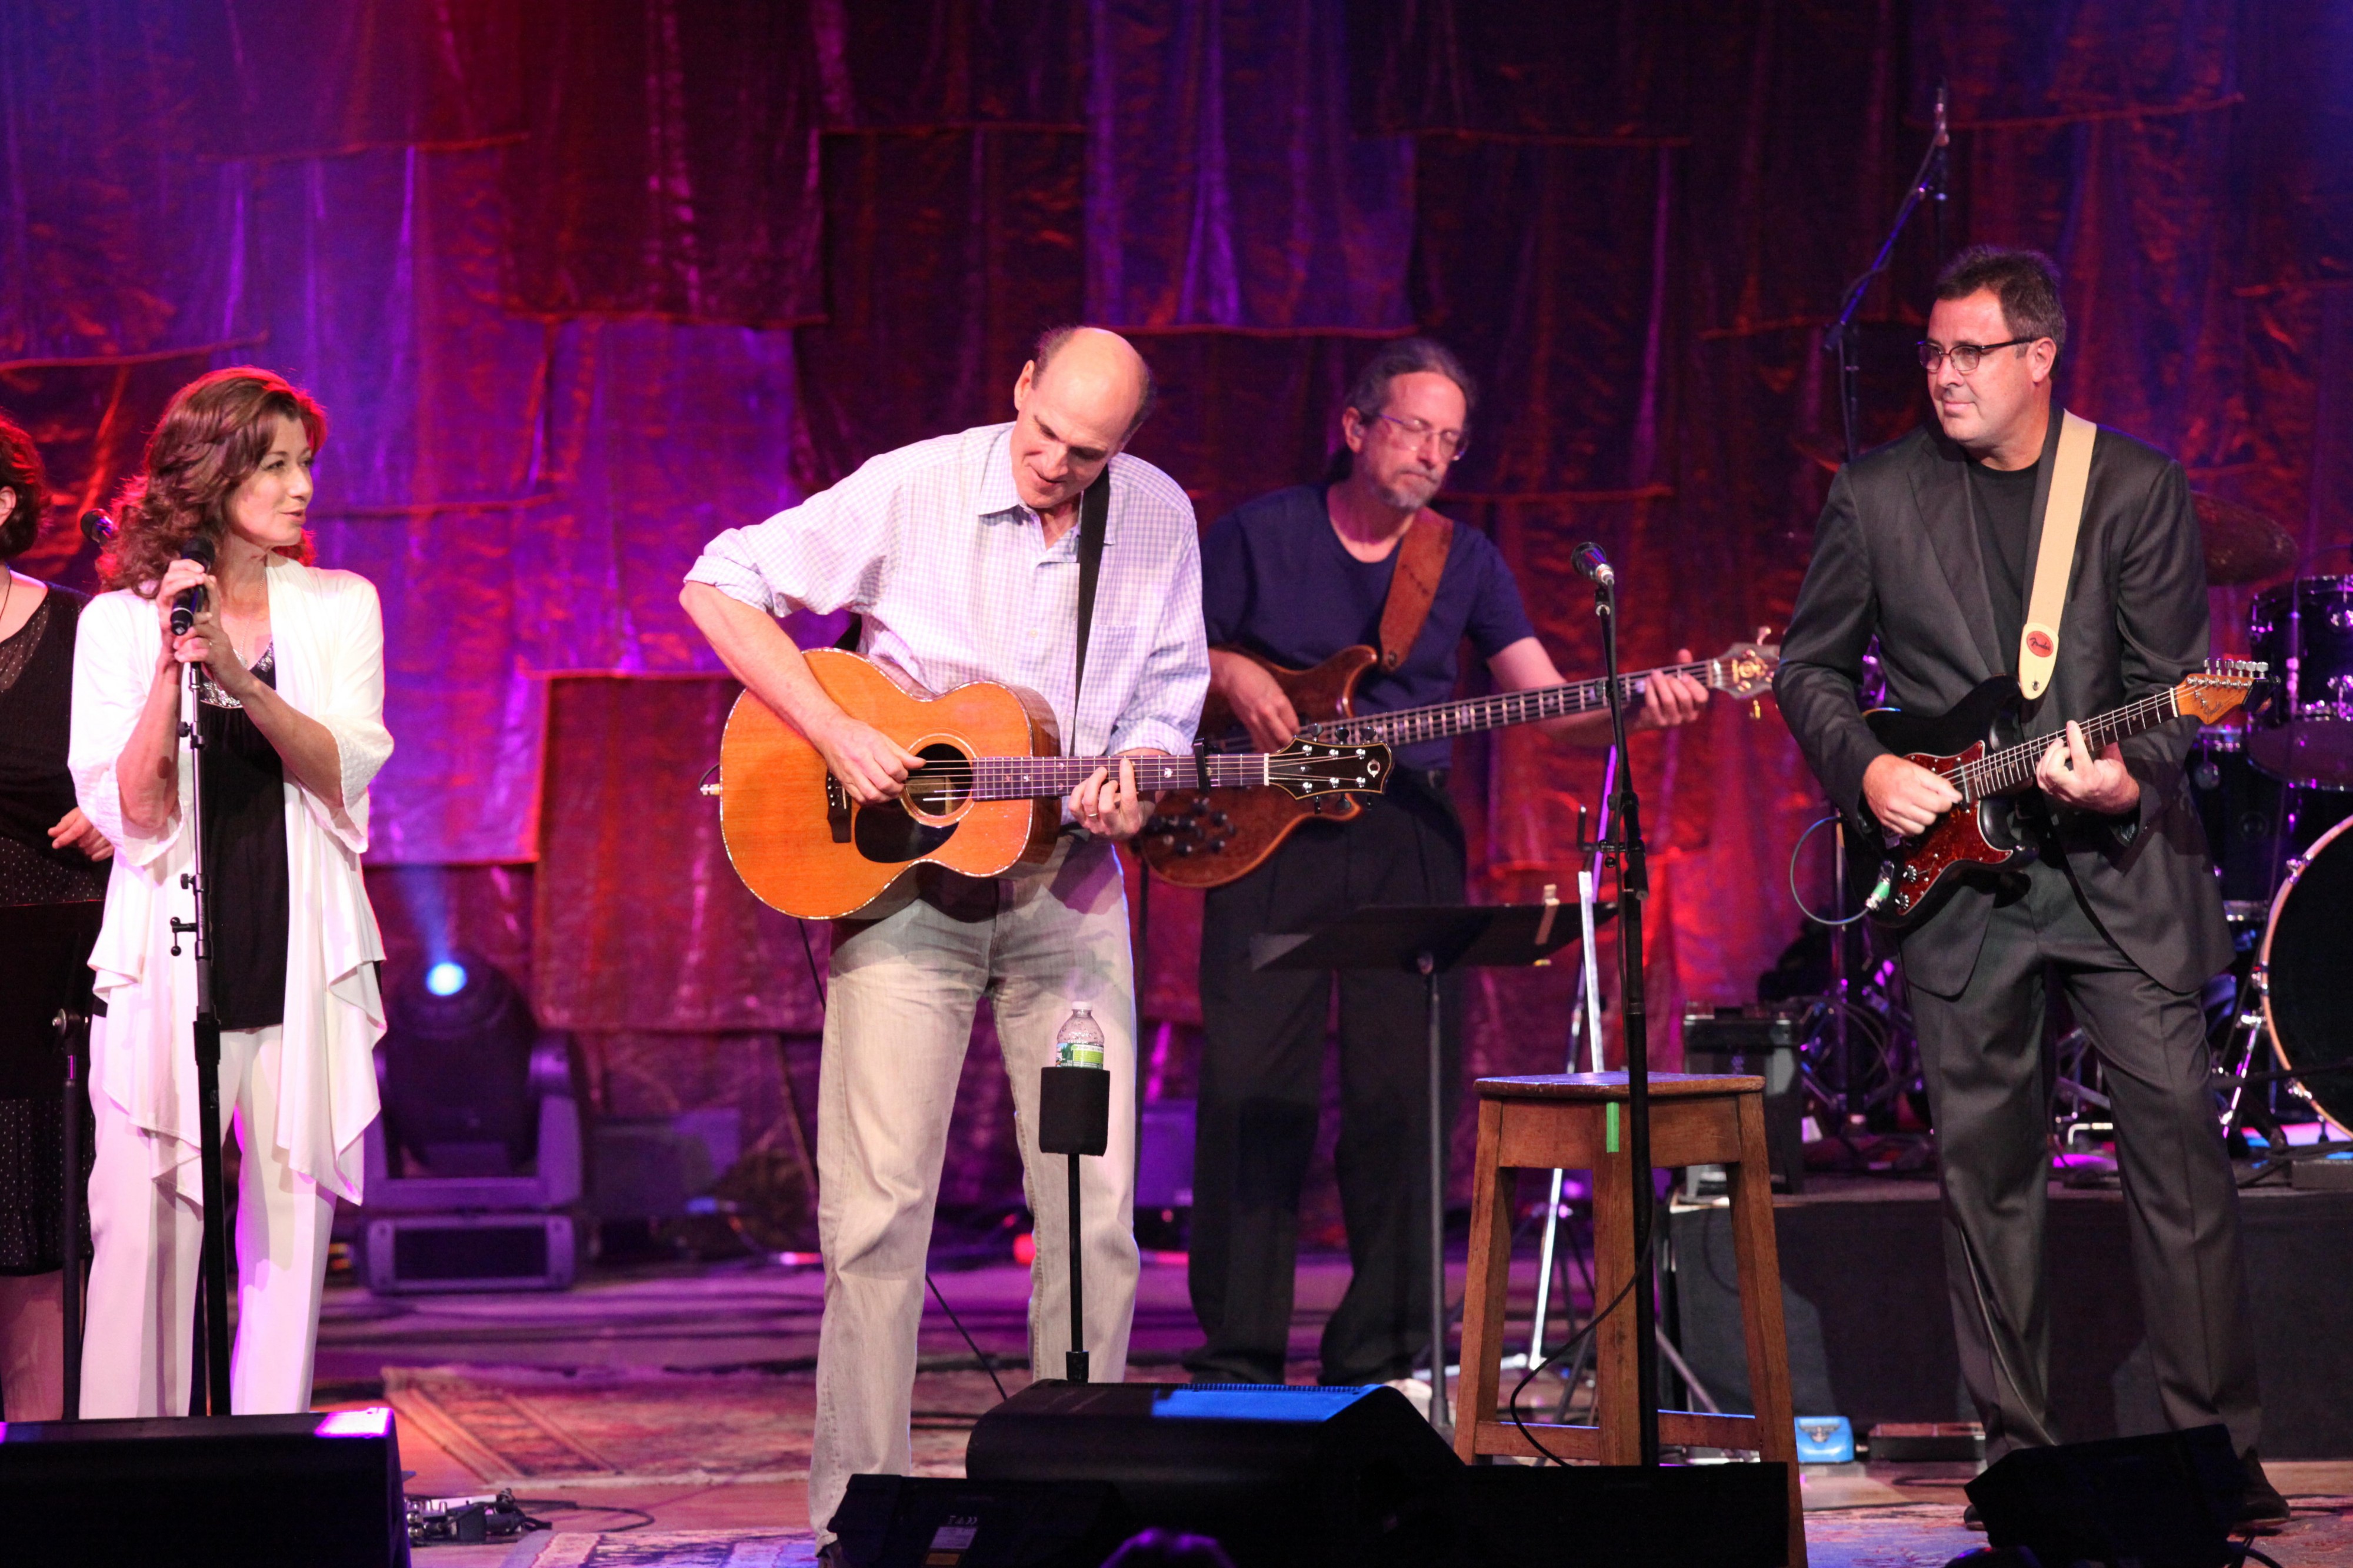 Amy Grant, James Taylor, and Vince Gill